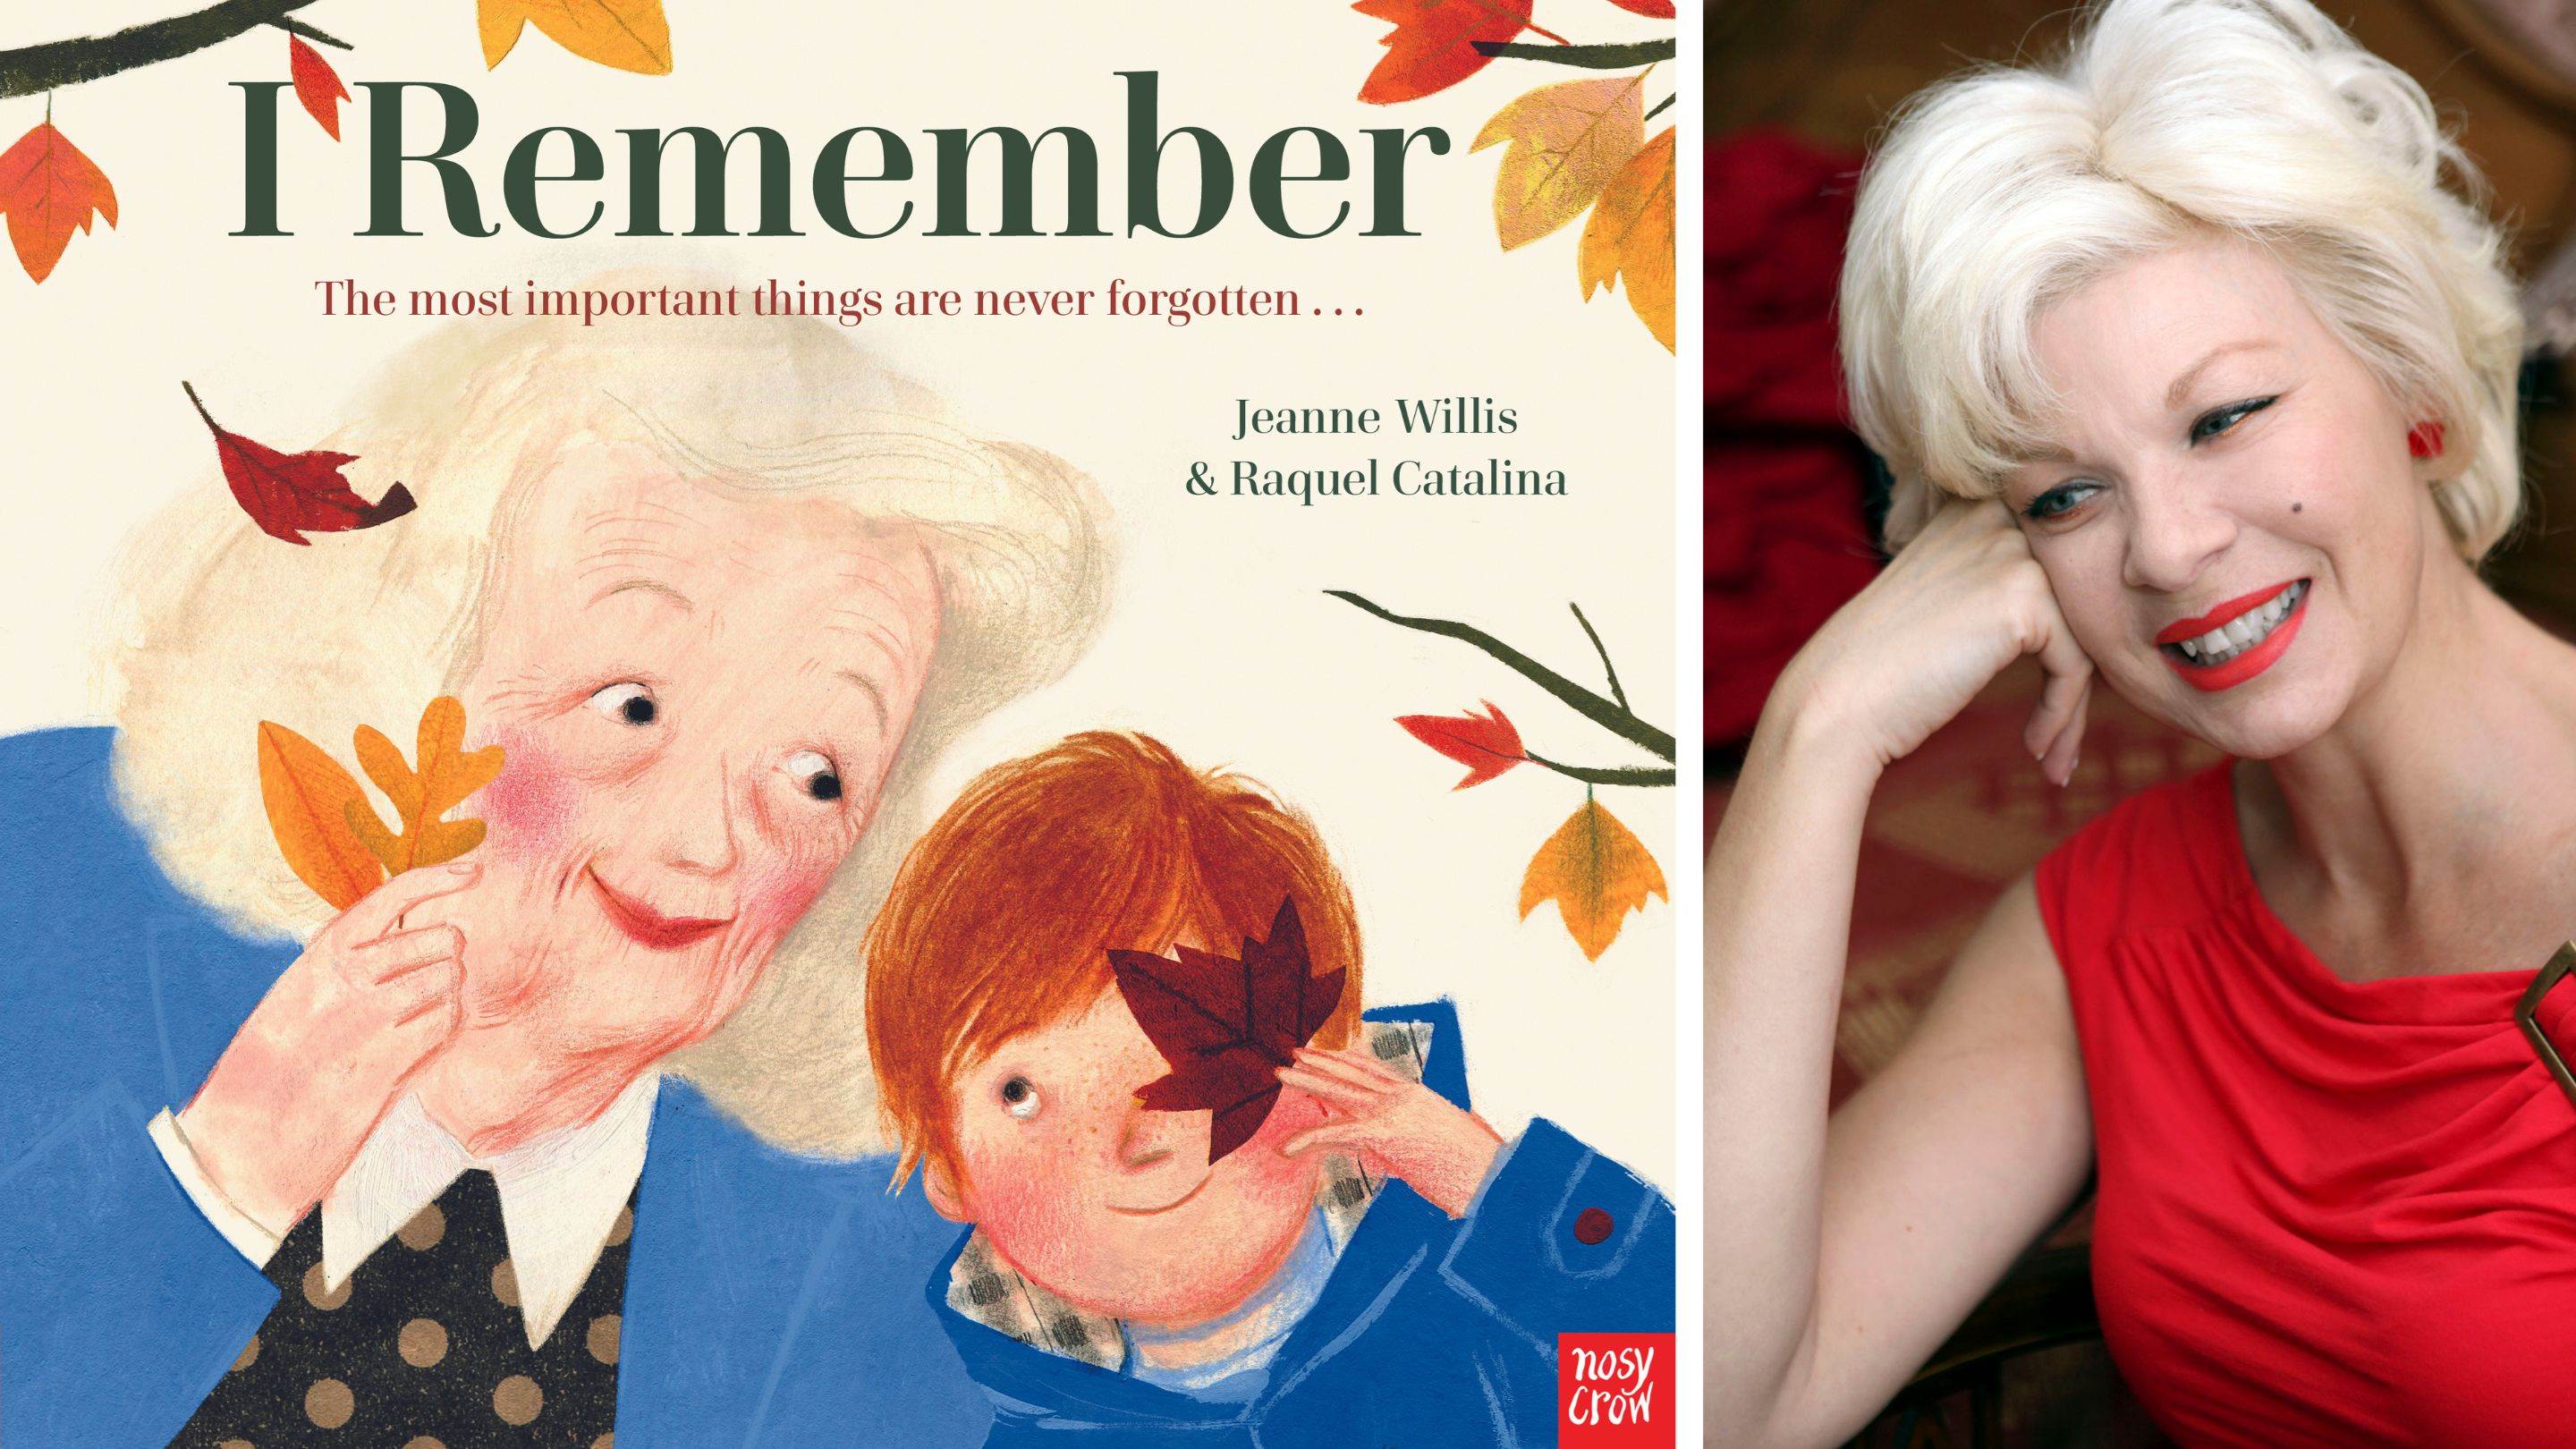 Jeanne Willis and the cover of I Remember